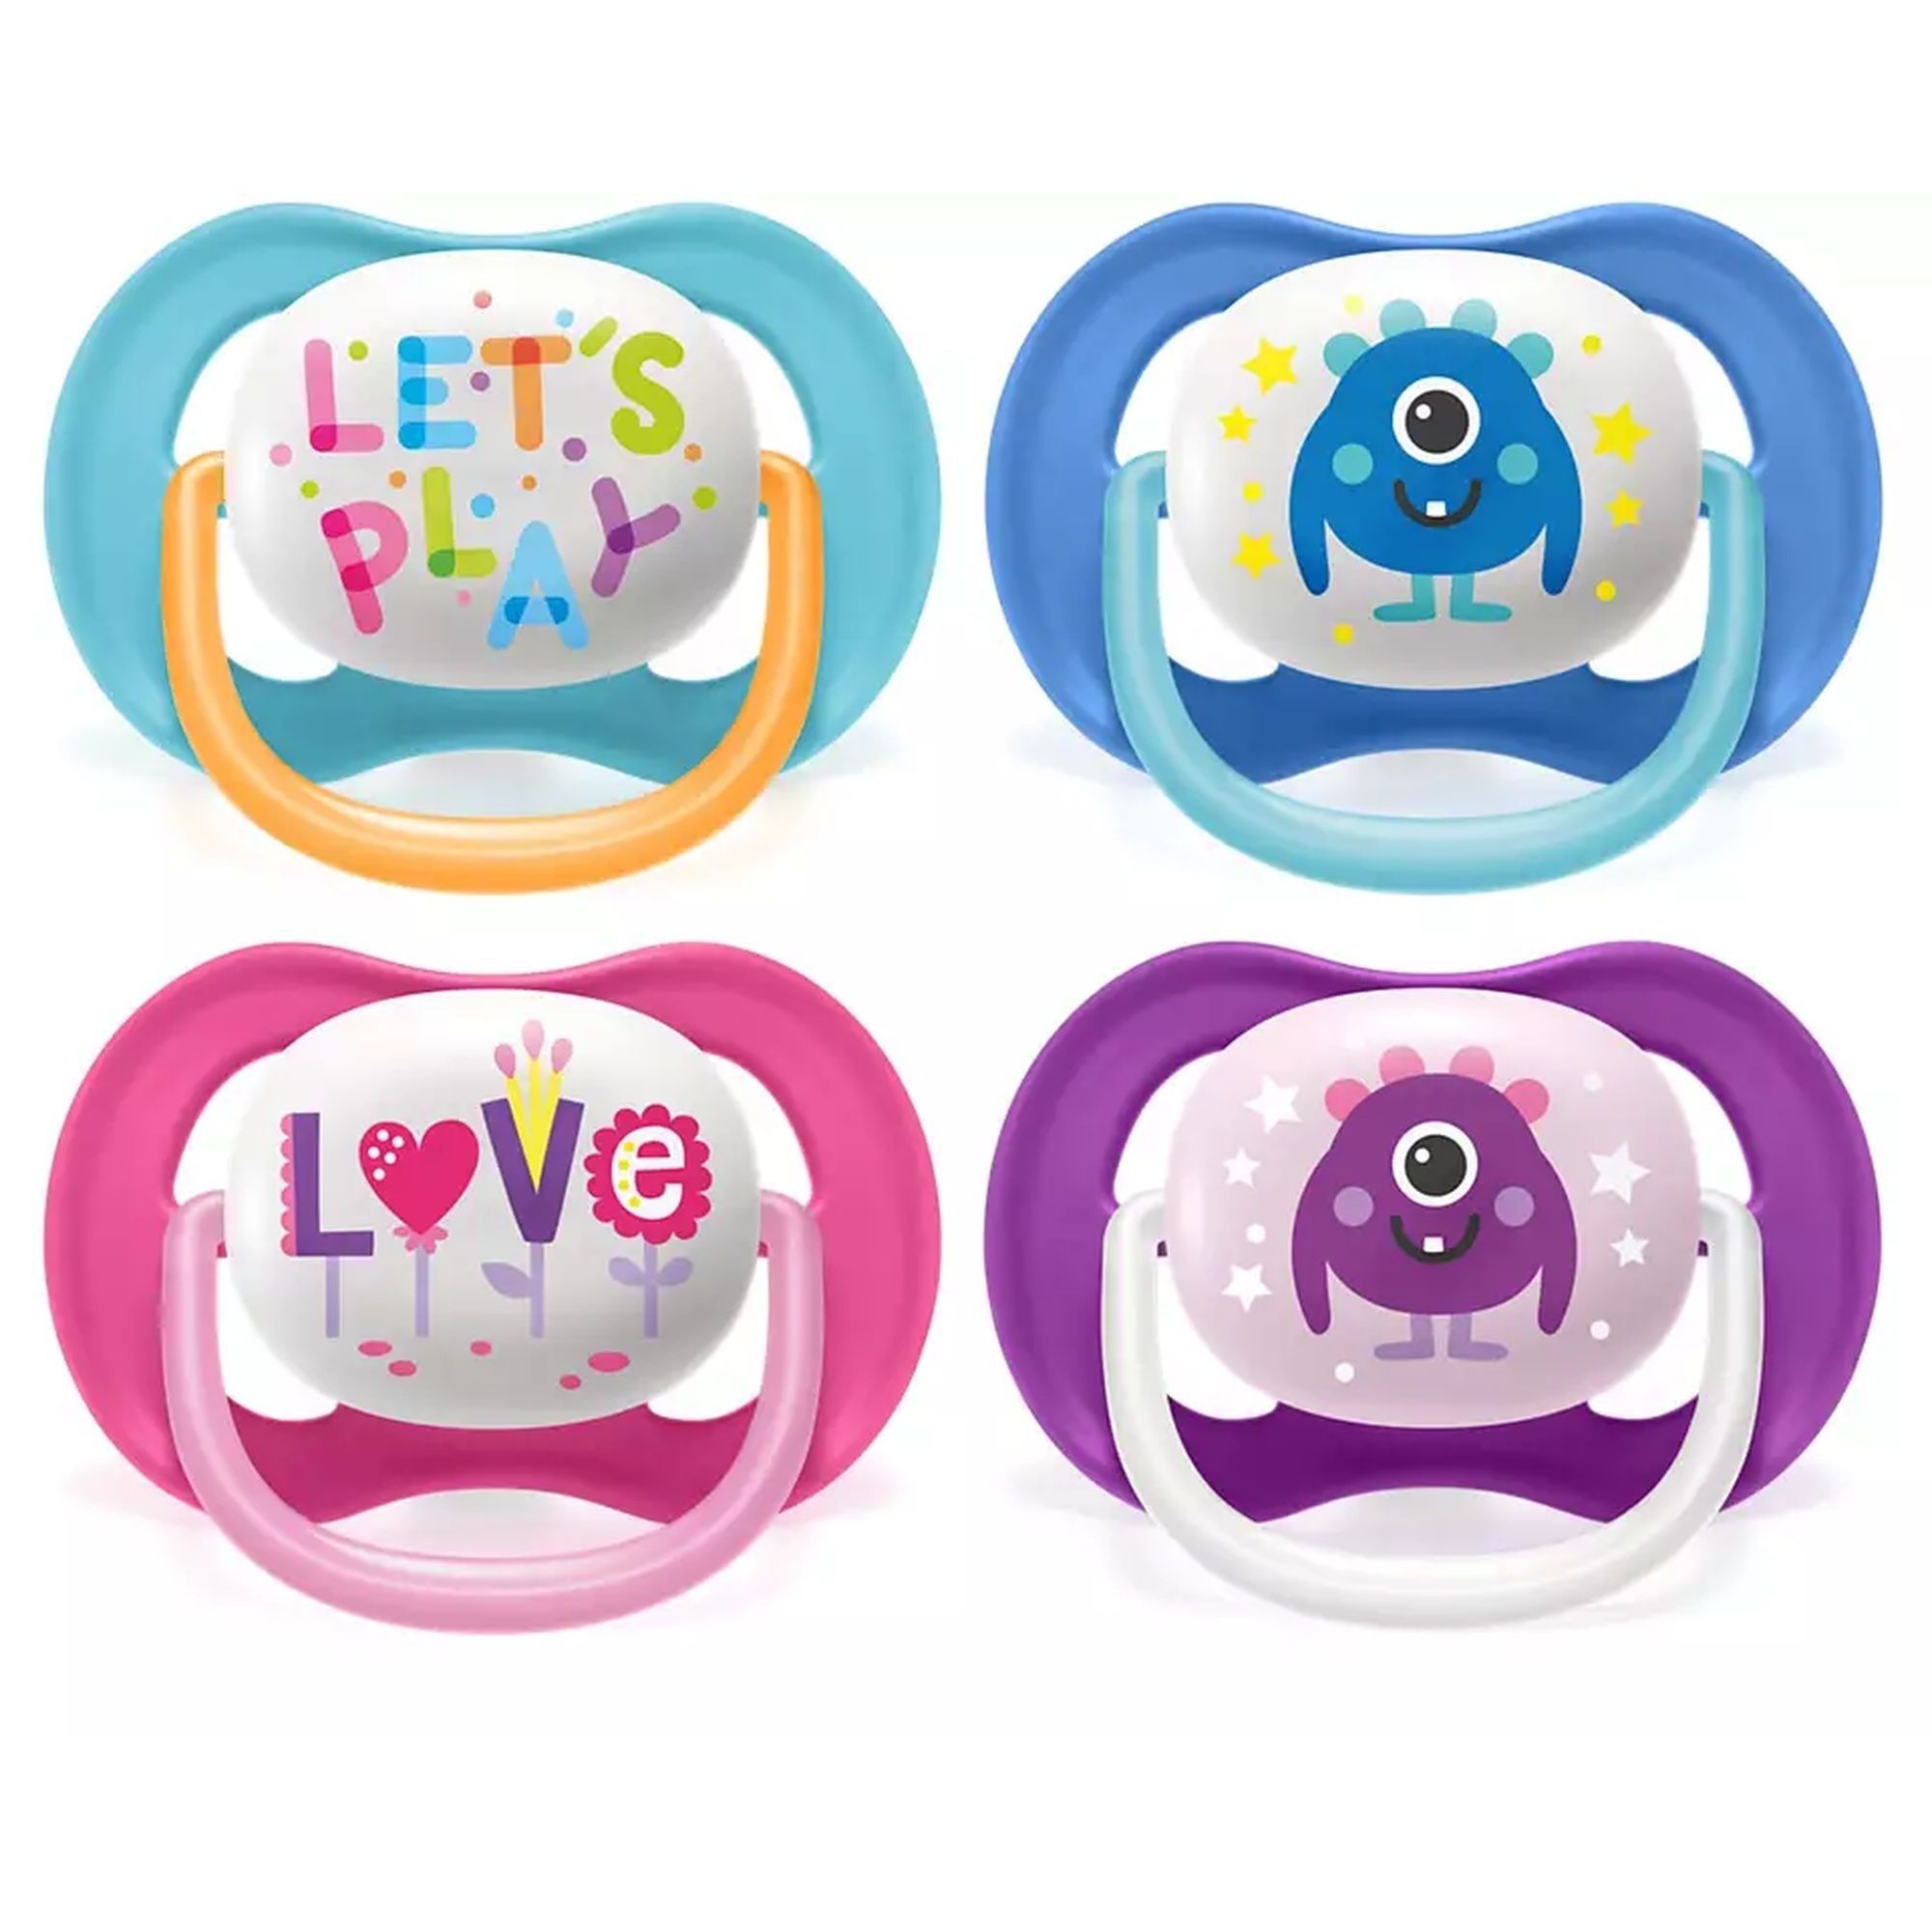 Lot de 2 sucettes Ultra Air 6/18 mois let's play ou love - Made in